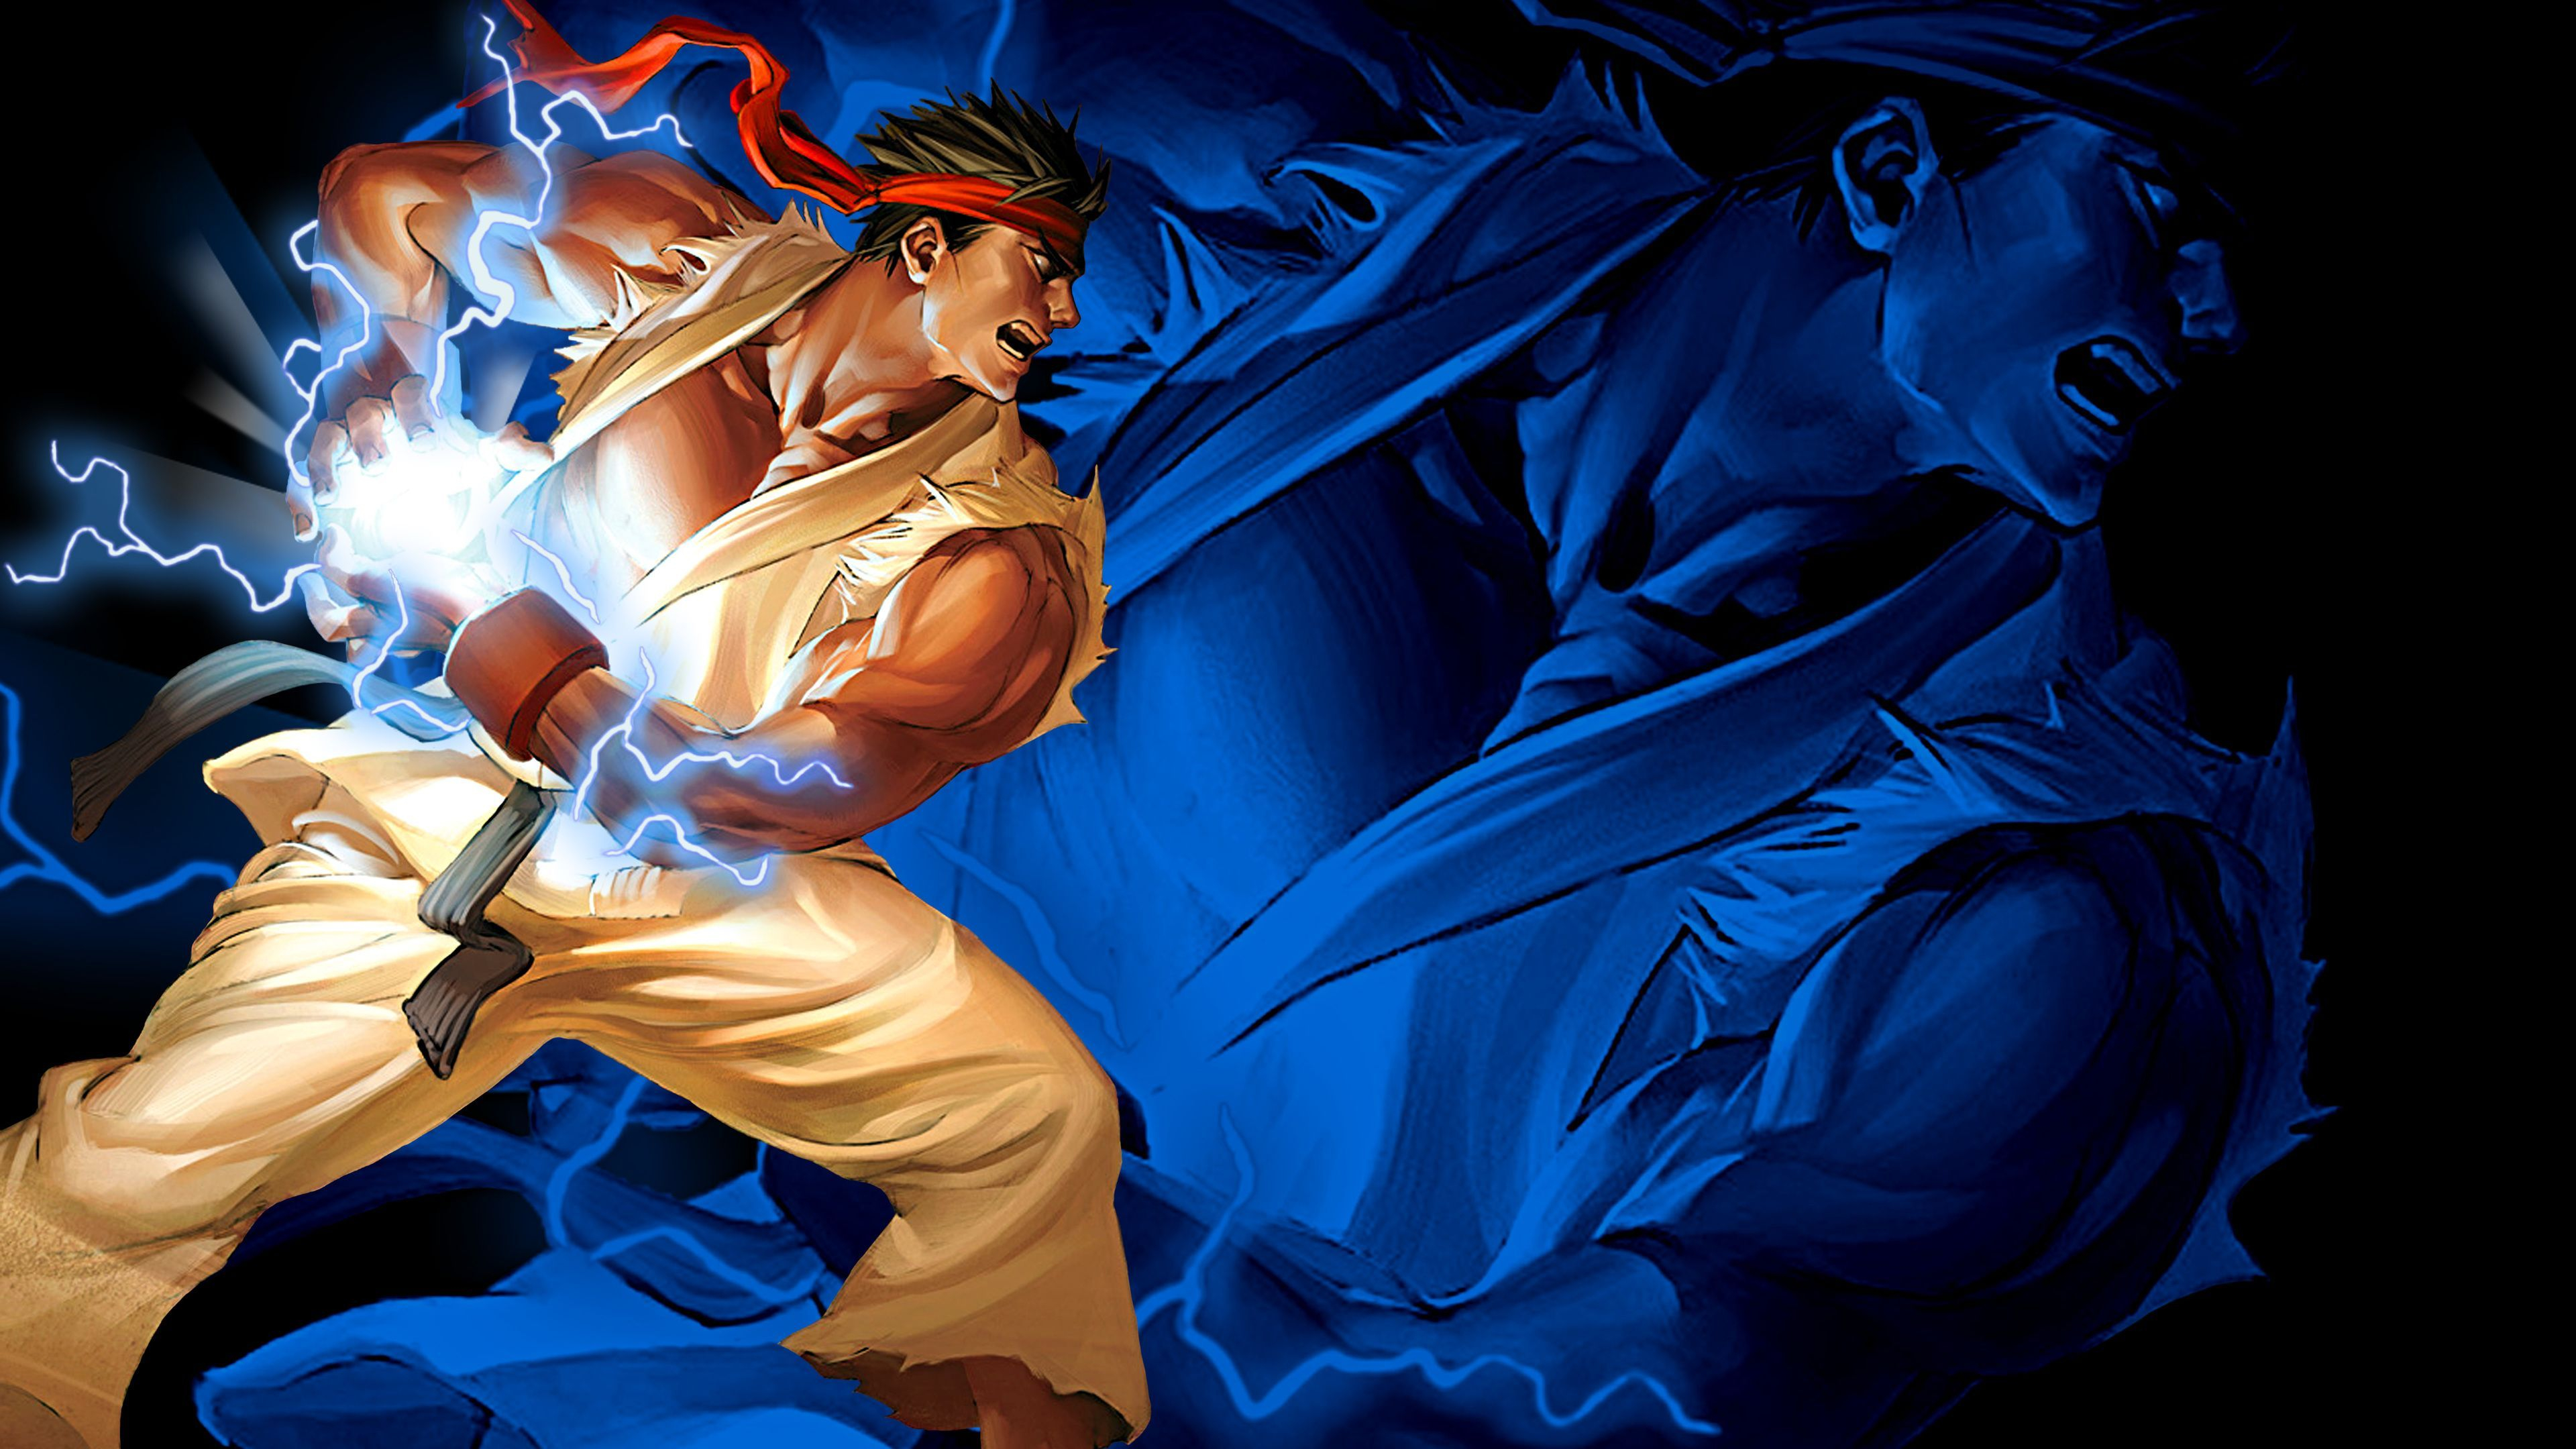 3840x2160 Ryu Street Fighter 2 Wallpapers Top Free Ryu Street Fighter 2 Backgrounds